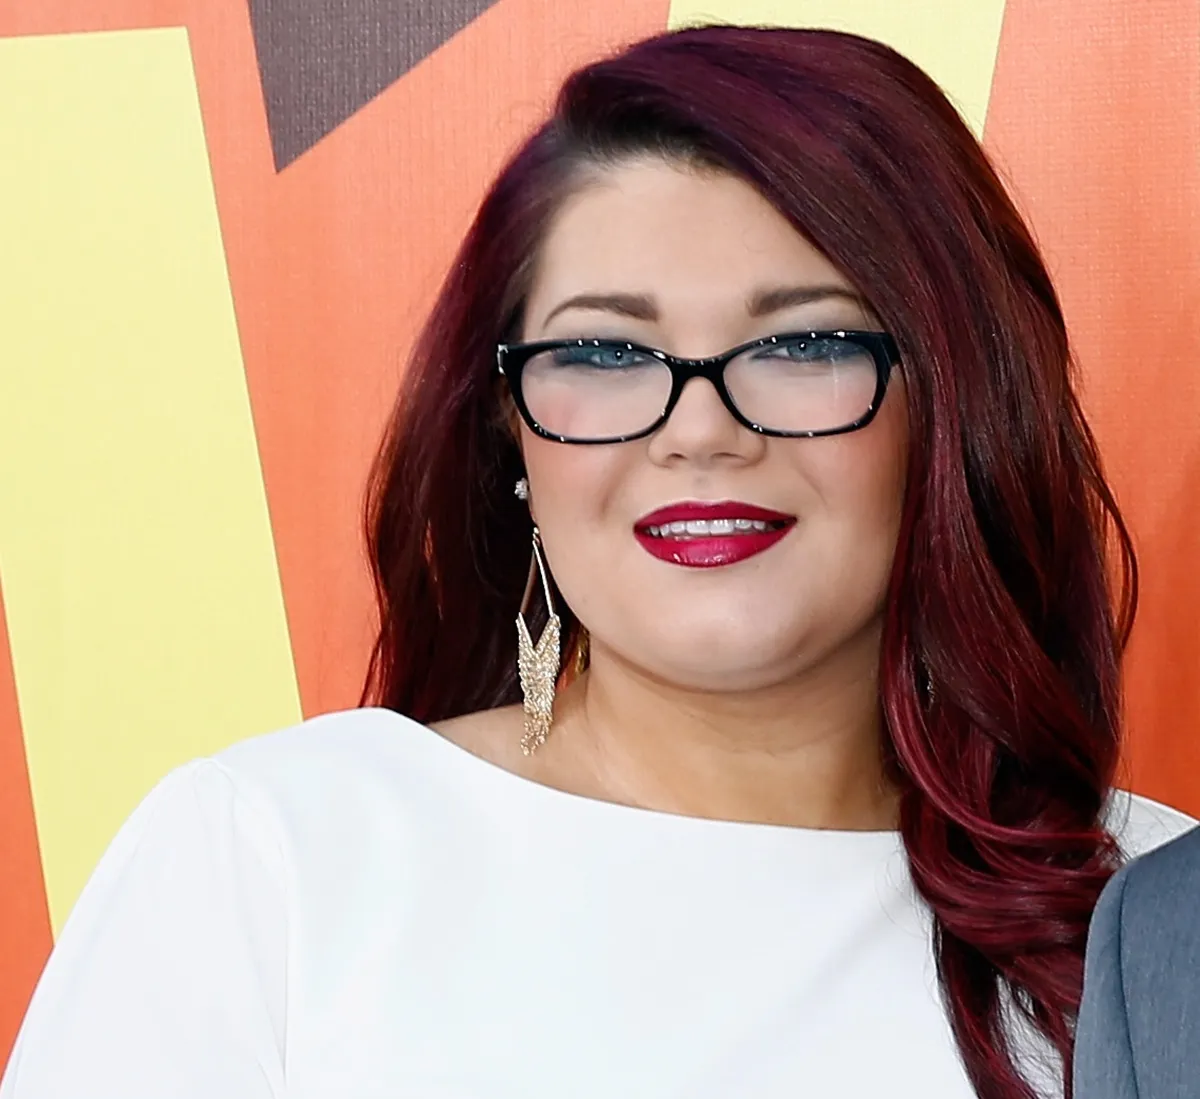 Amber Portwood attends The 2015 MTV Movie Awards at Nokia Theatre L.A. Live on April 12, 2015 in Los Angeles, California.